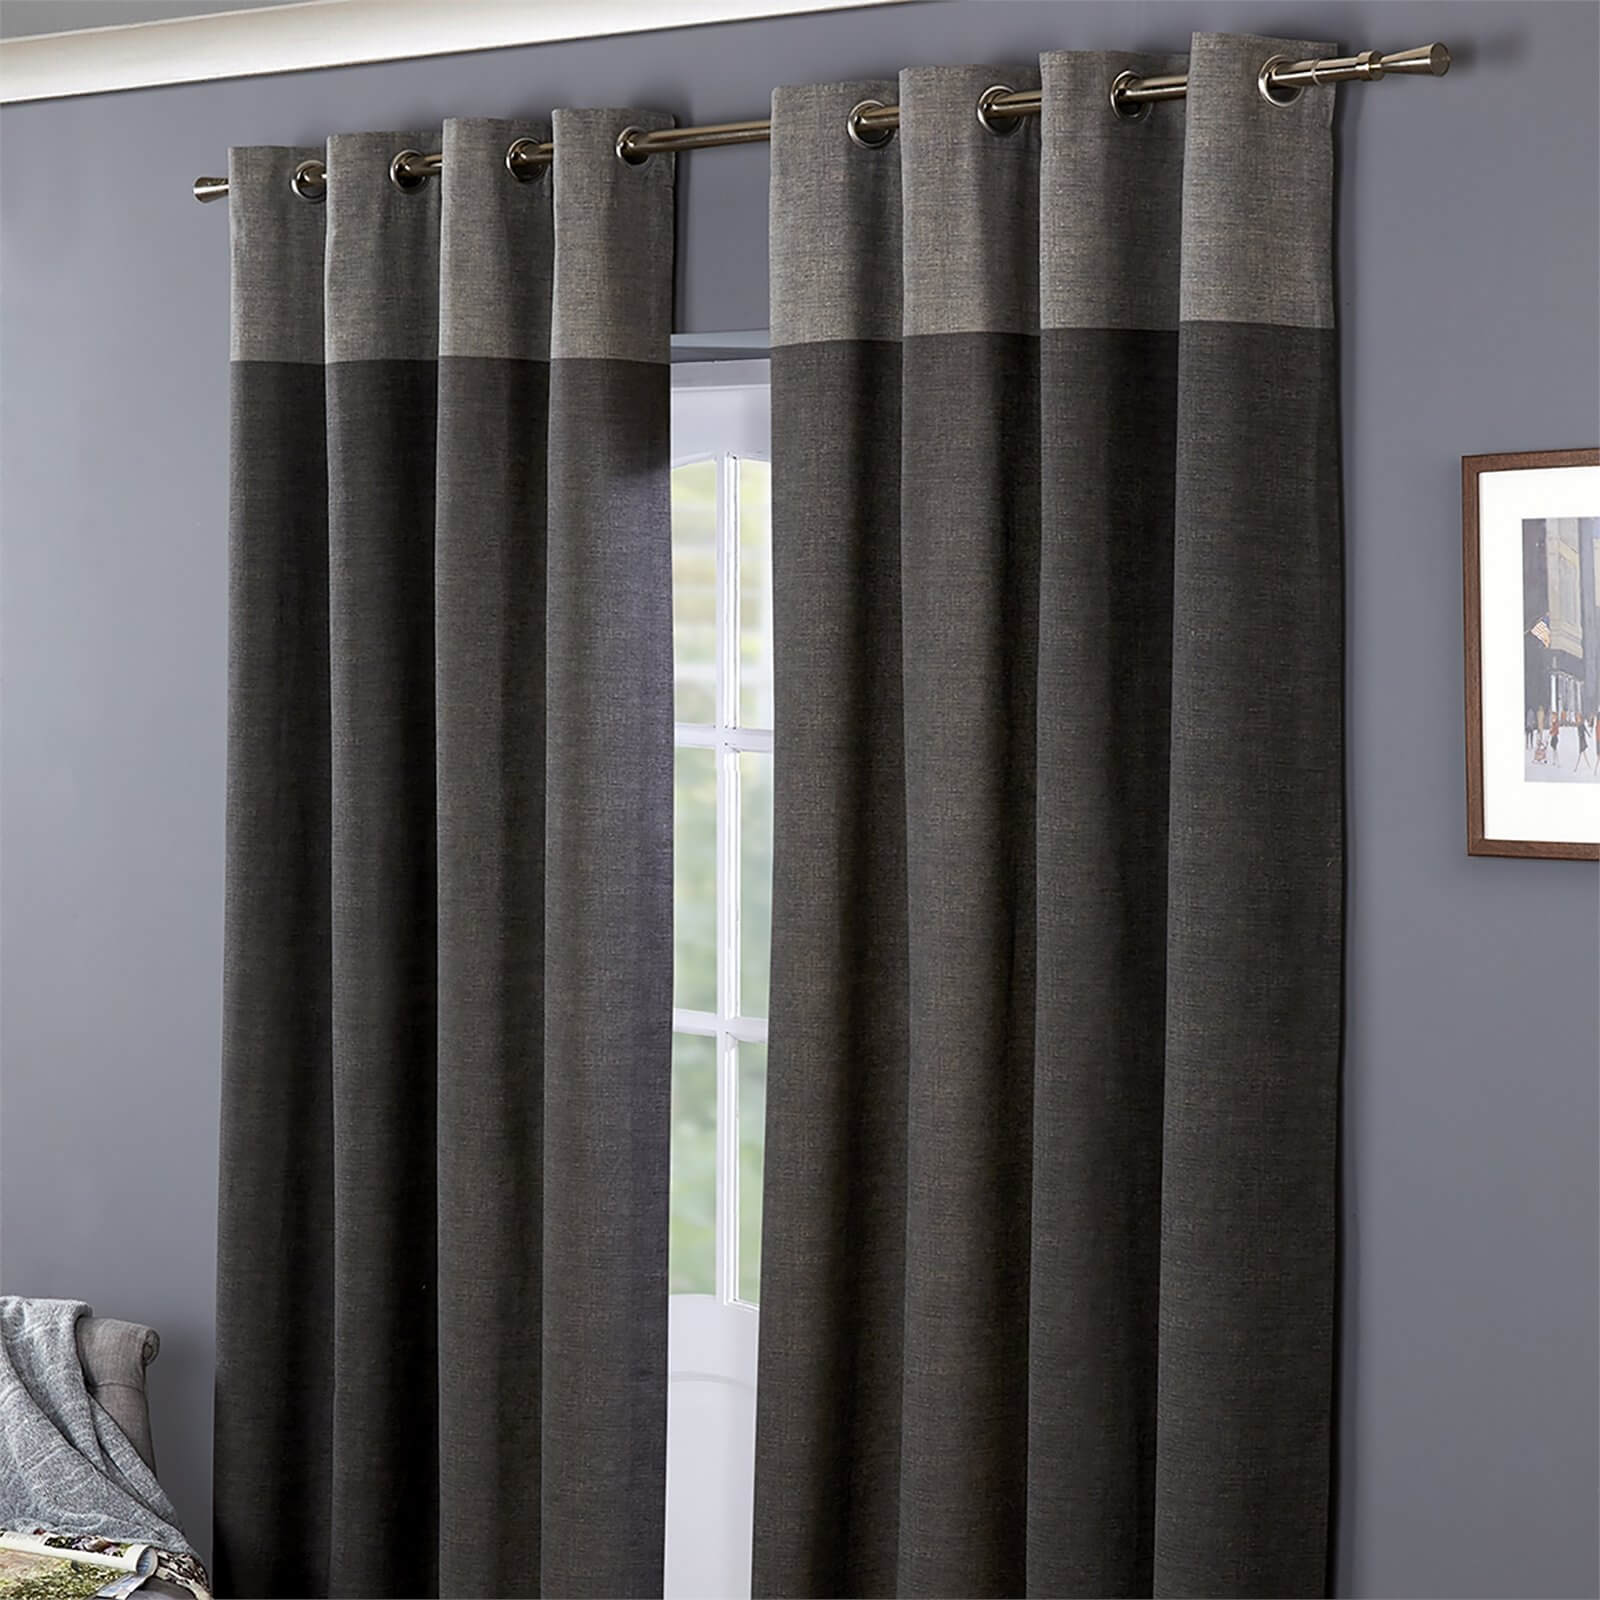 Oslo 100% Cotton Eyelet Curtains 46 x 54 - Charcoal